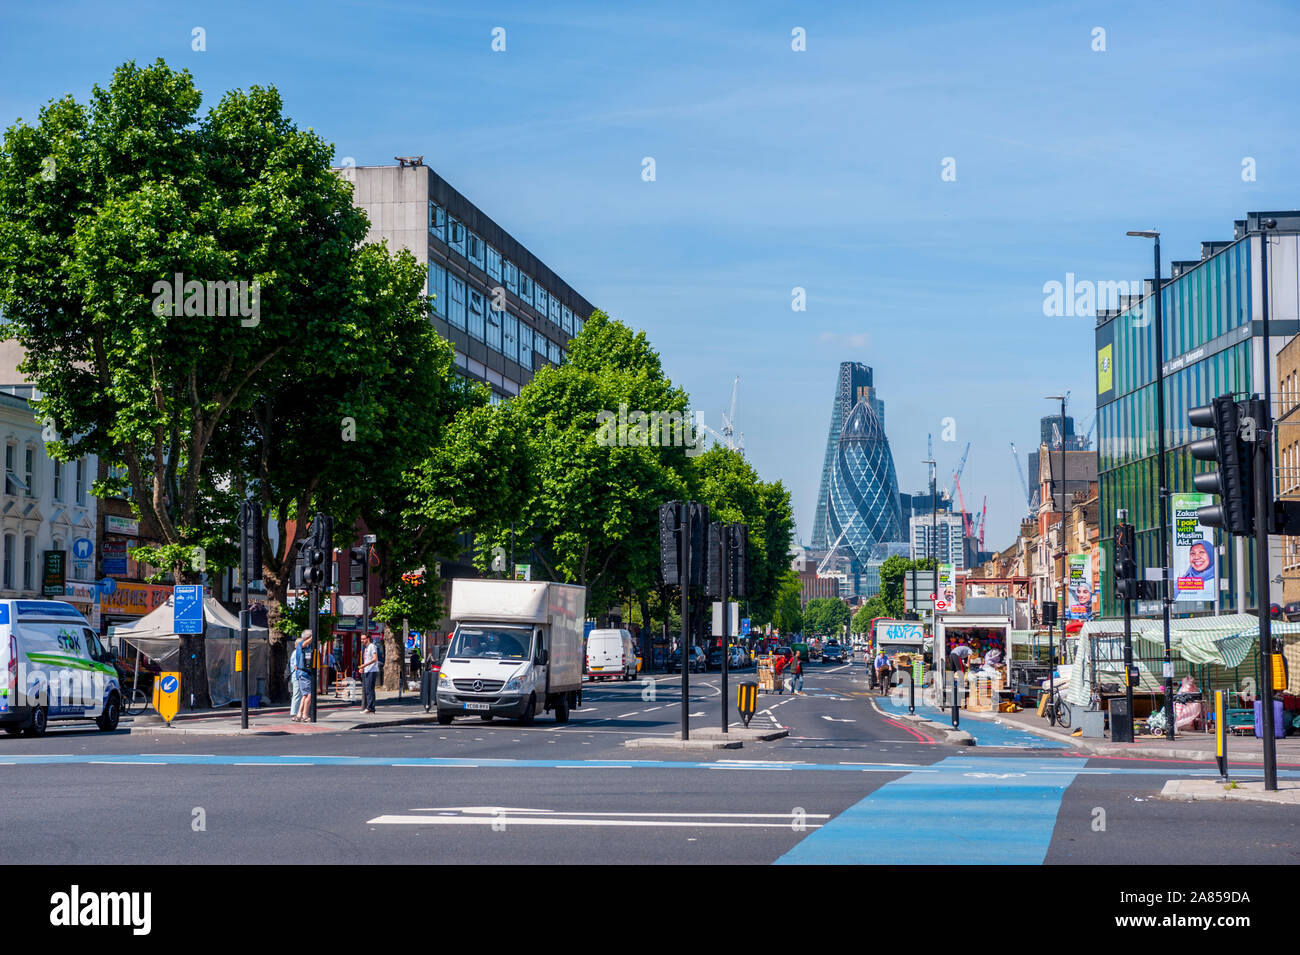 Looking down the Mile End Road London towards the buildings of the city Stock Photo